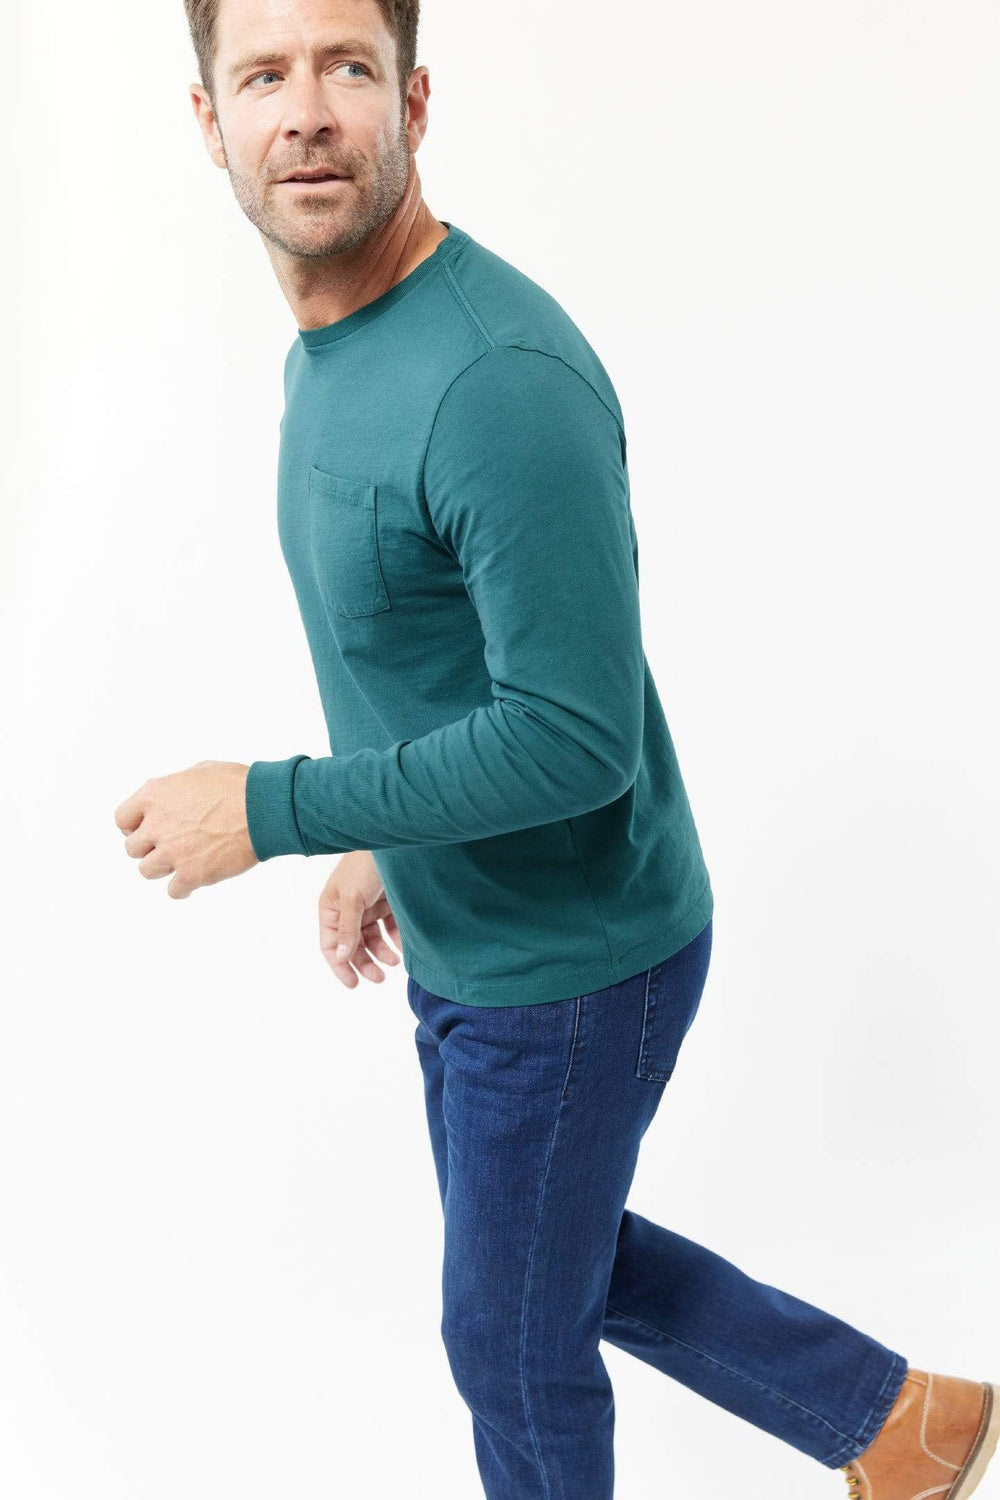 Buy Forest Green Long Sleeve Pima Cotton Crew Neck Tee for Short Men | Ash & Erie   T-Shirts